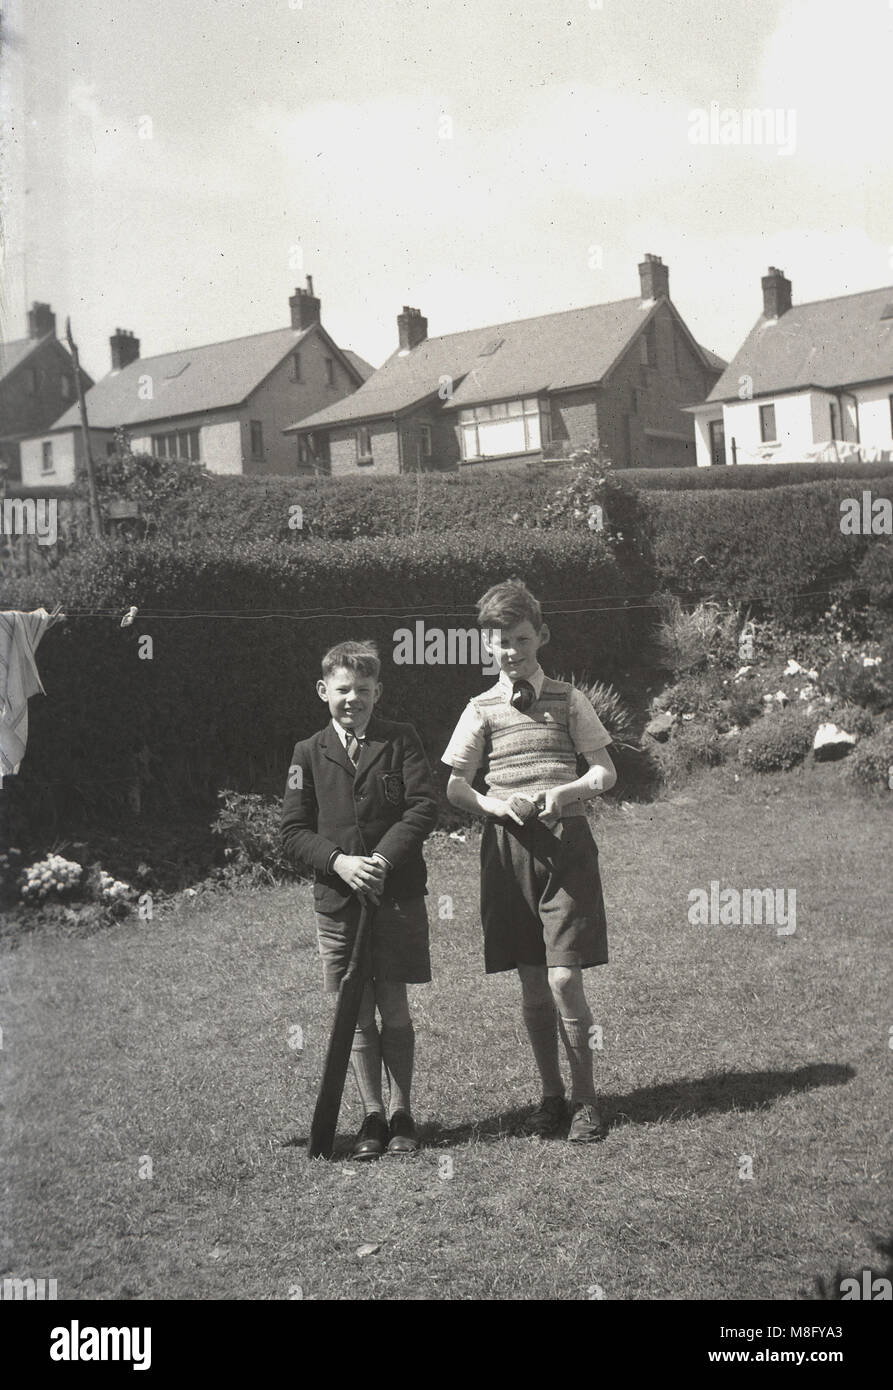 1950, historical, summertime and two smiling young boys, possibly brothers, standing together outside in a suburban back garden, the youngest holding an old cricket bat, England, UK. Stock Photo